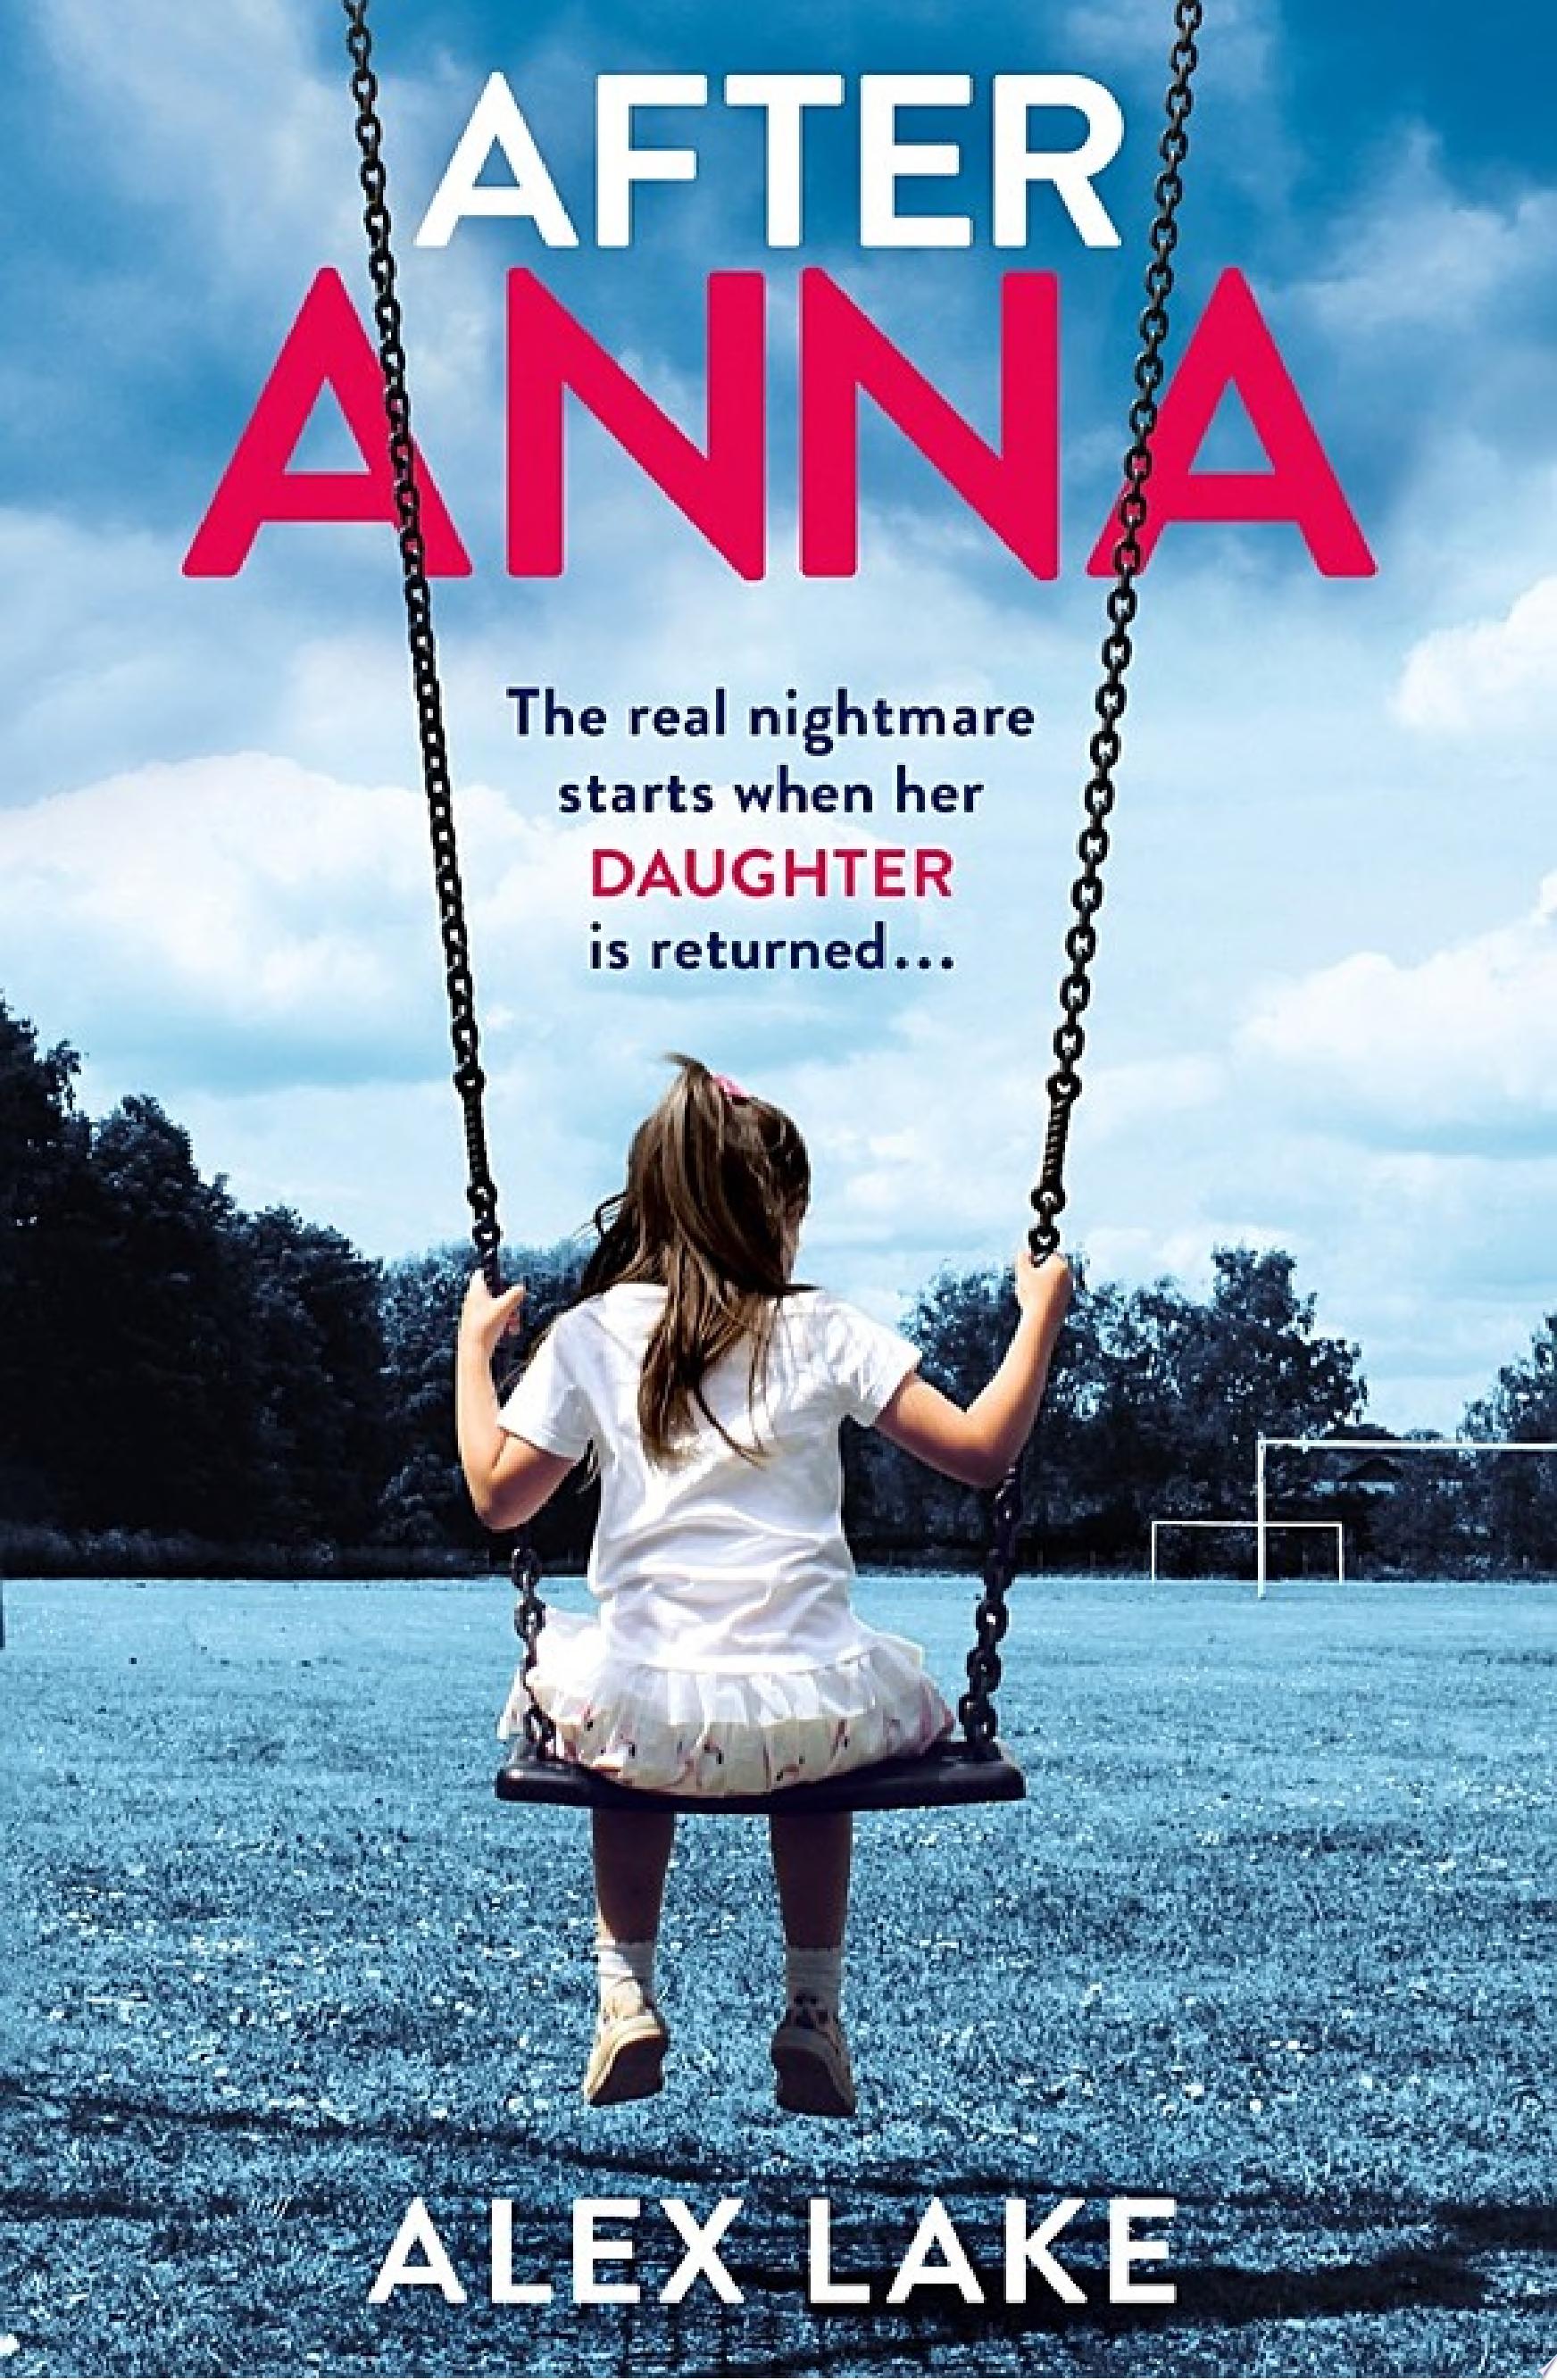 Image for "After Anna"